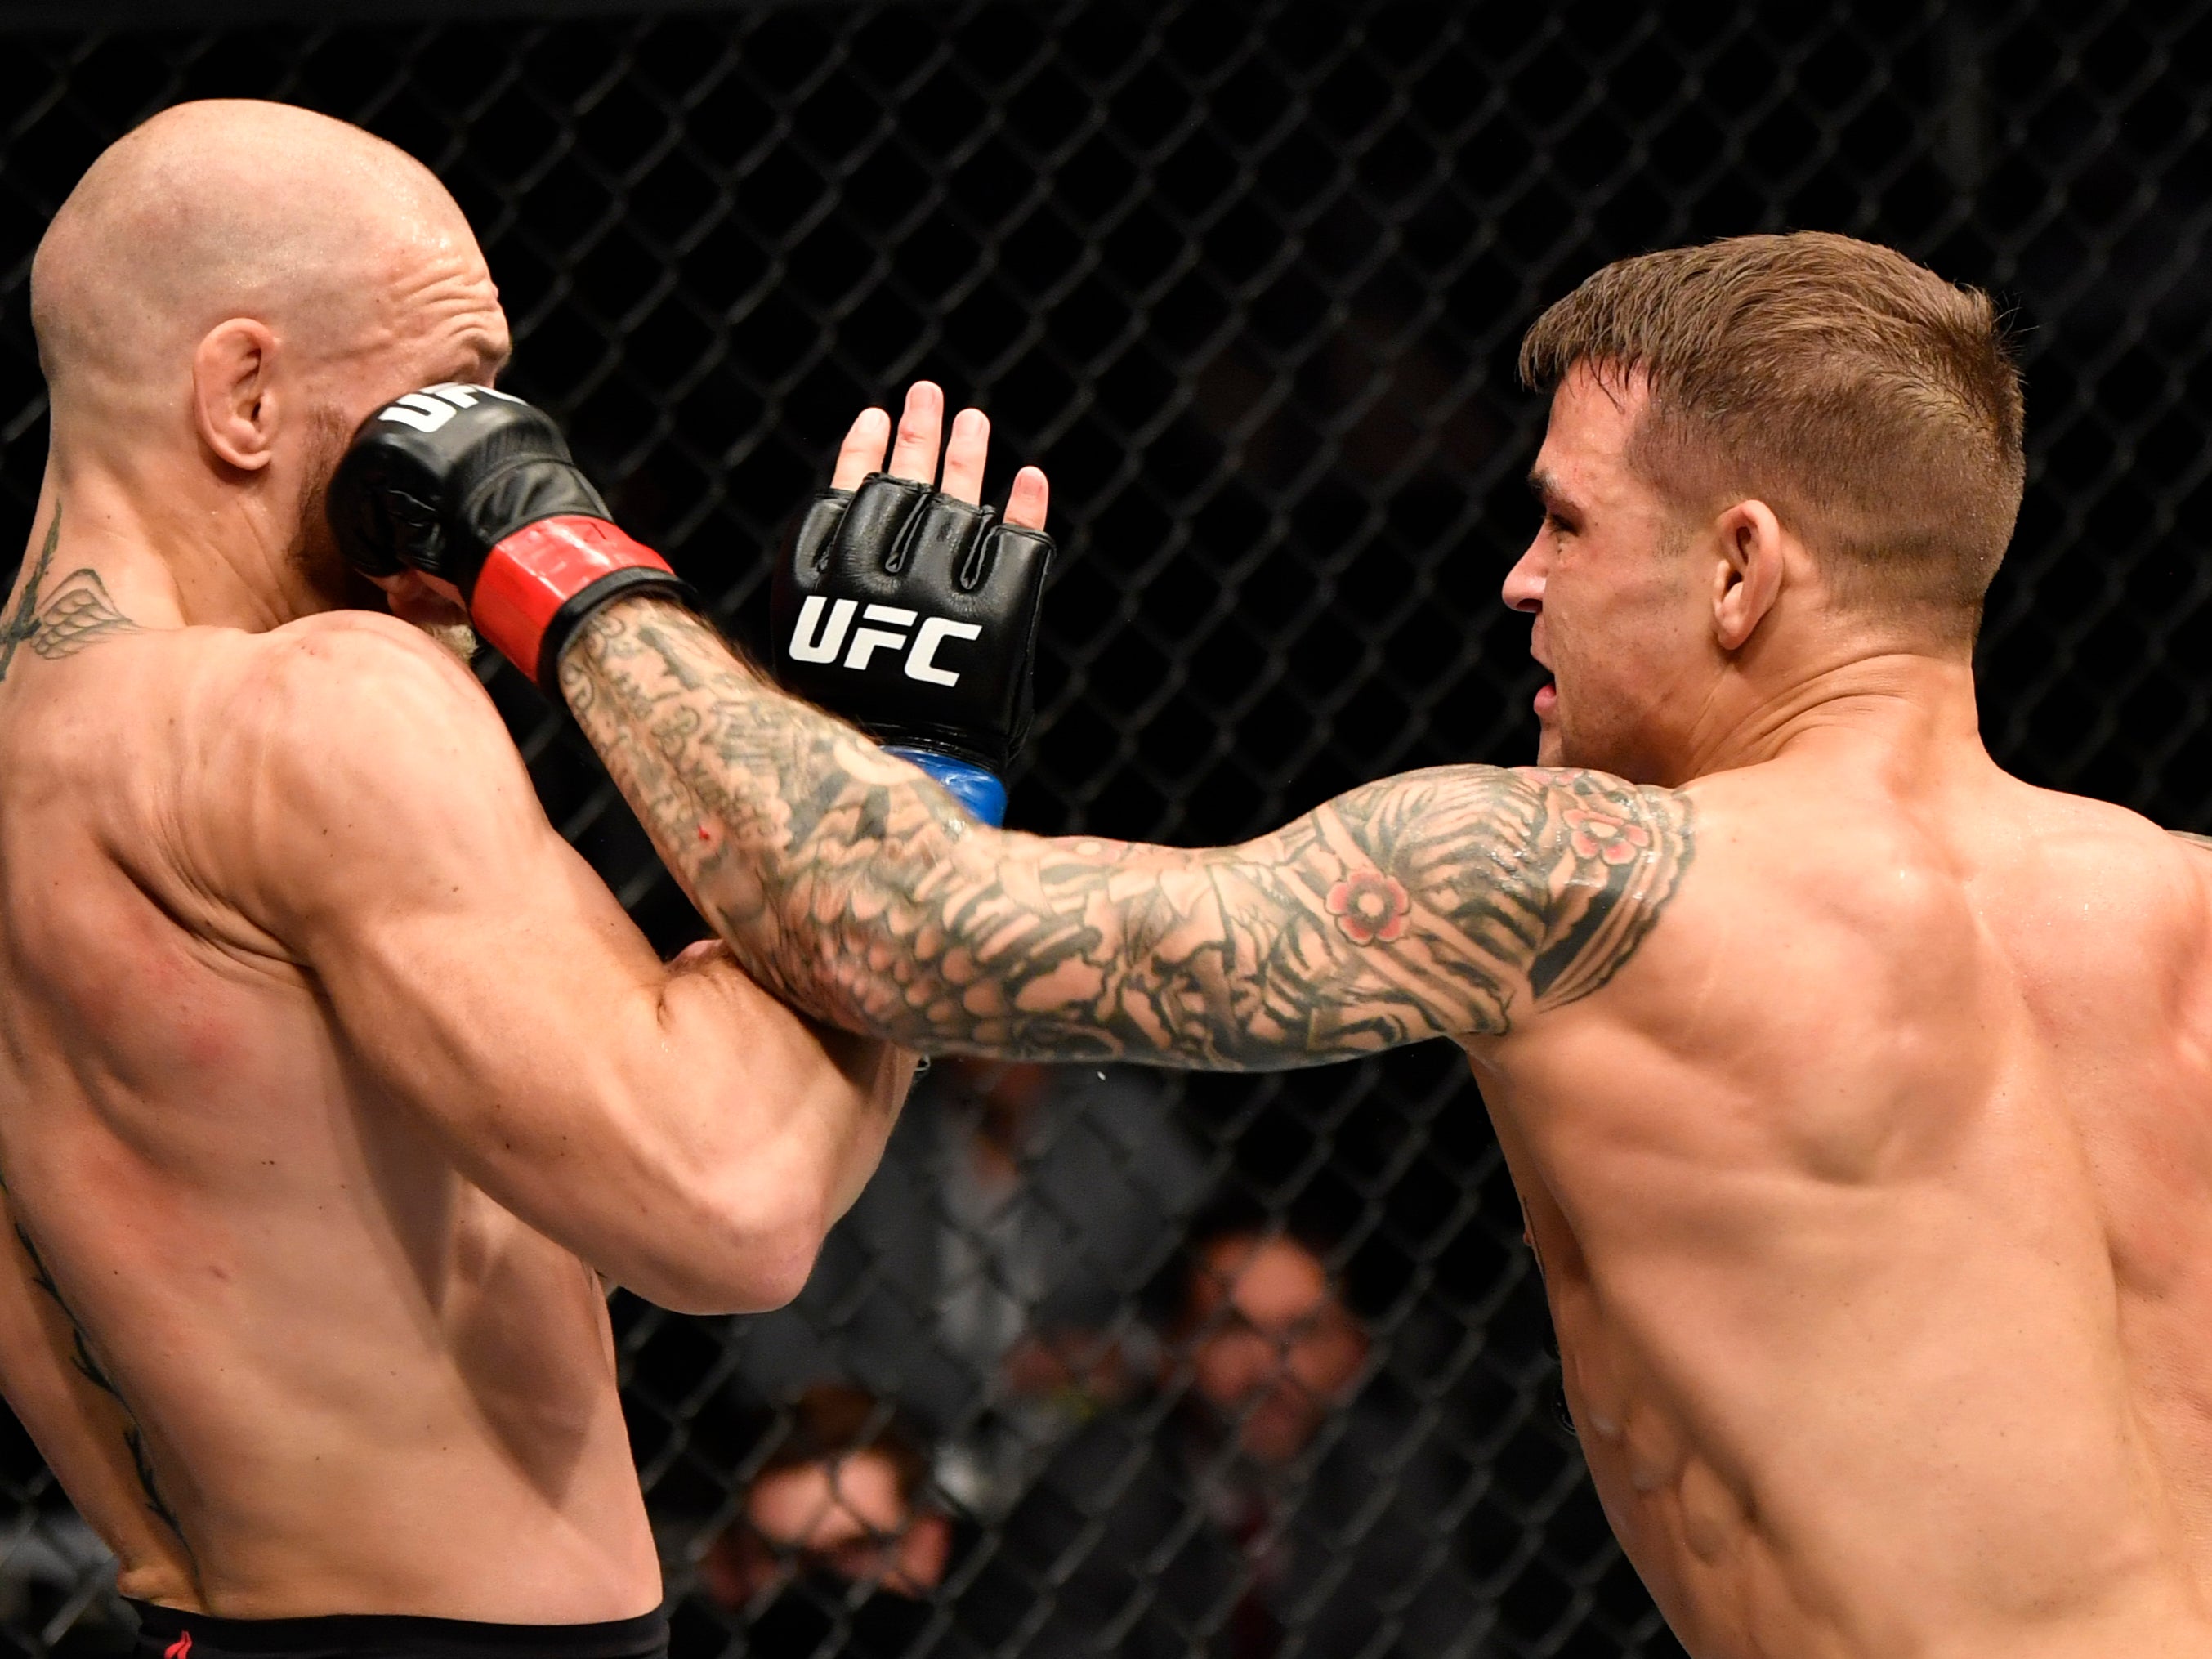 Dustin Poirier (right) knocked out Conor McGregor in their rematch last month